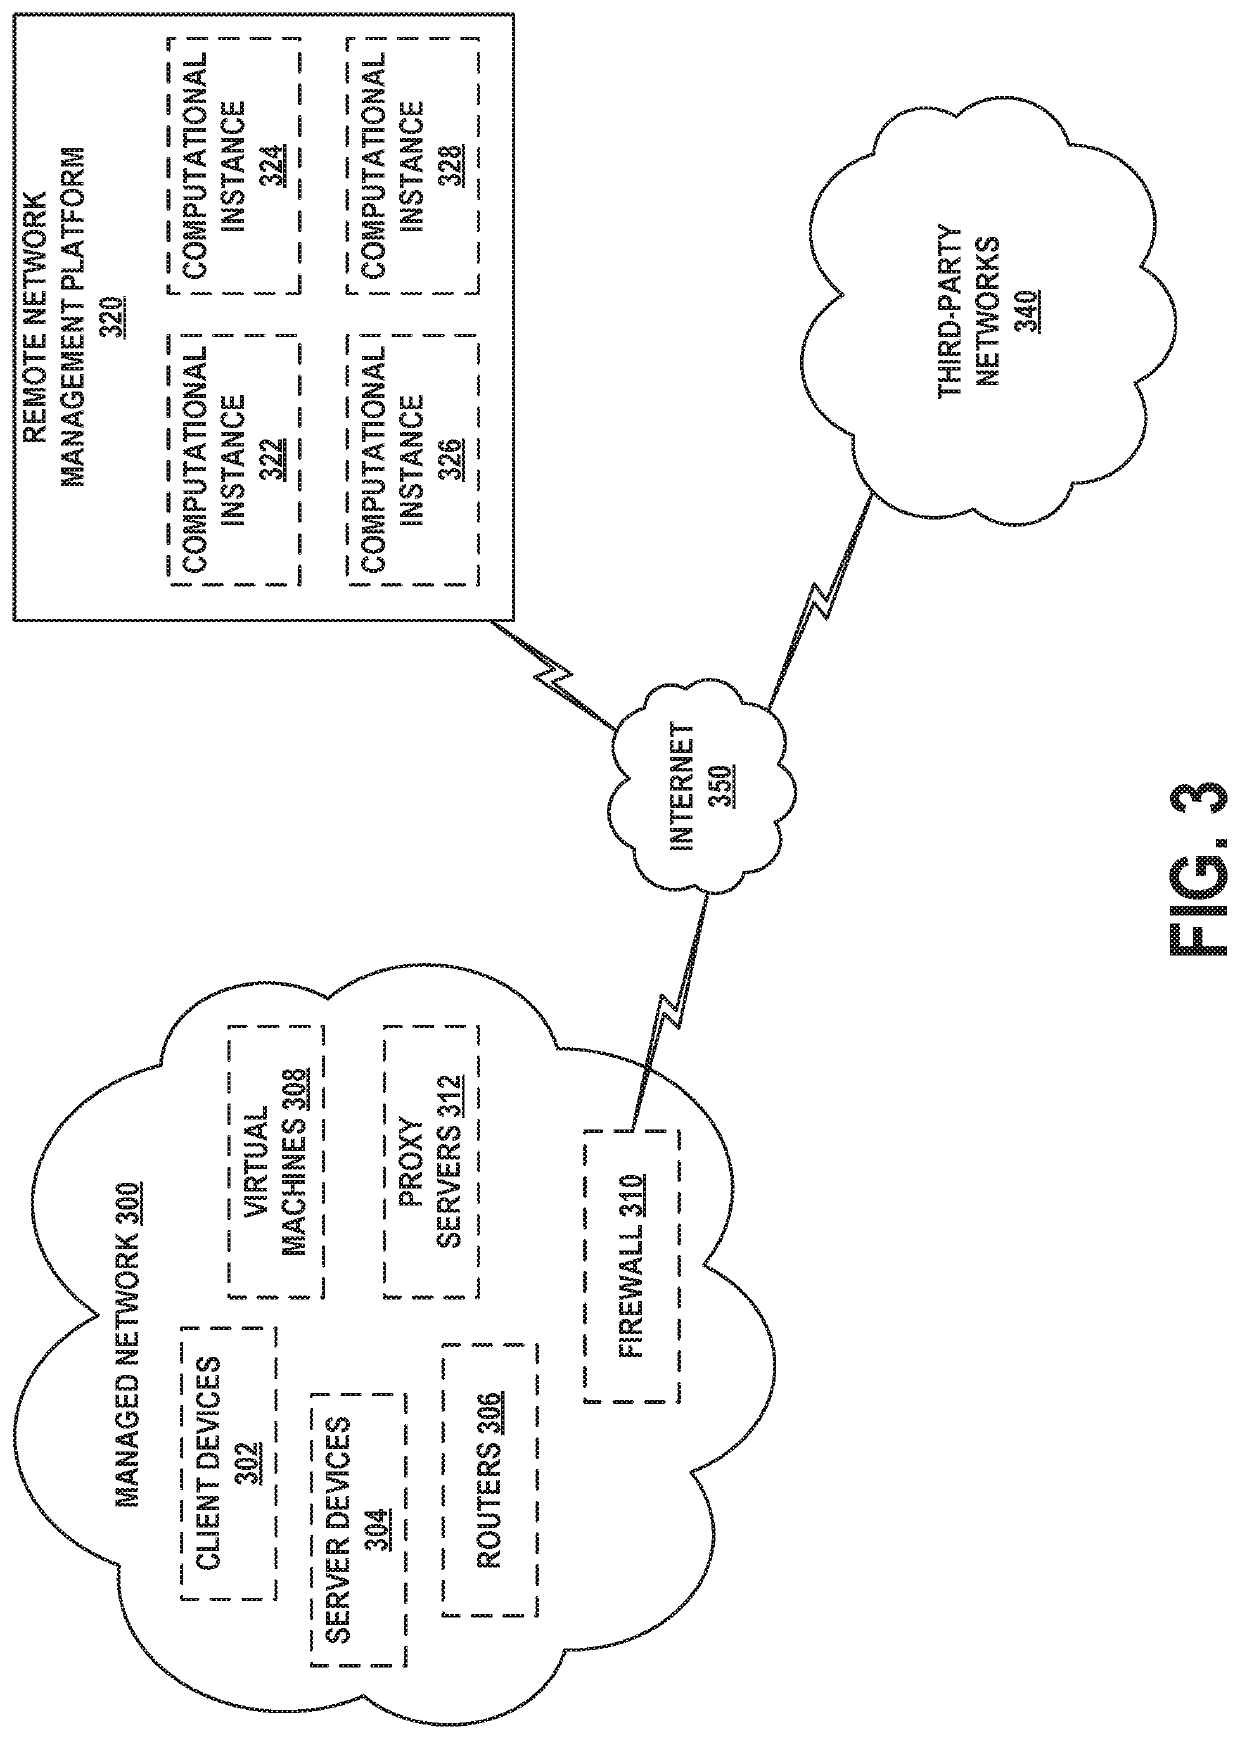 Discovery of database and related services